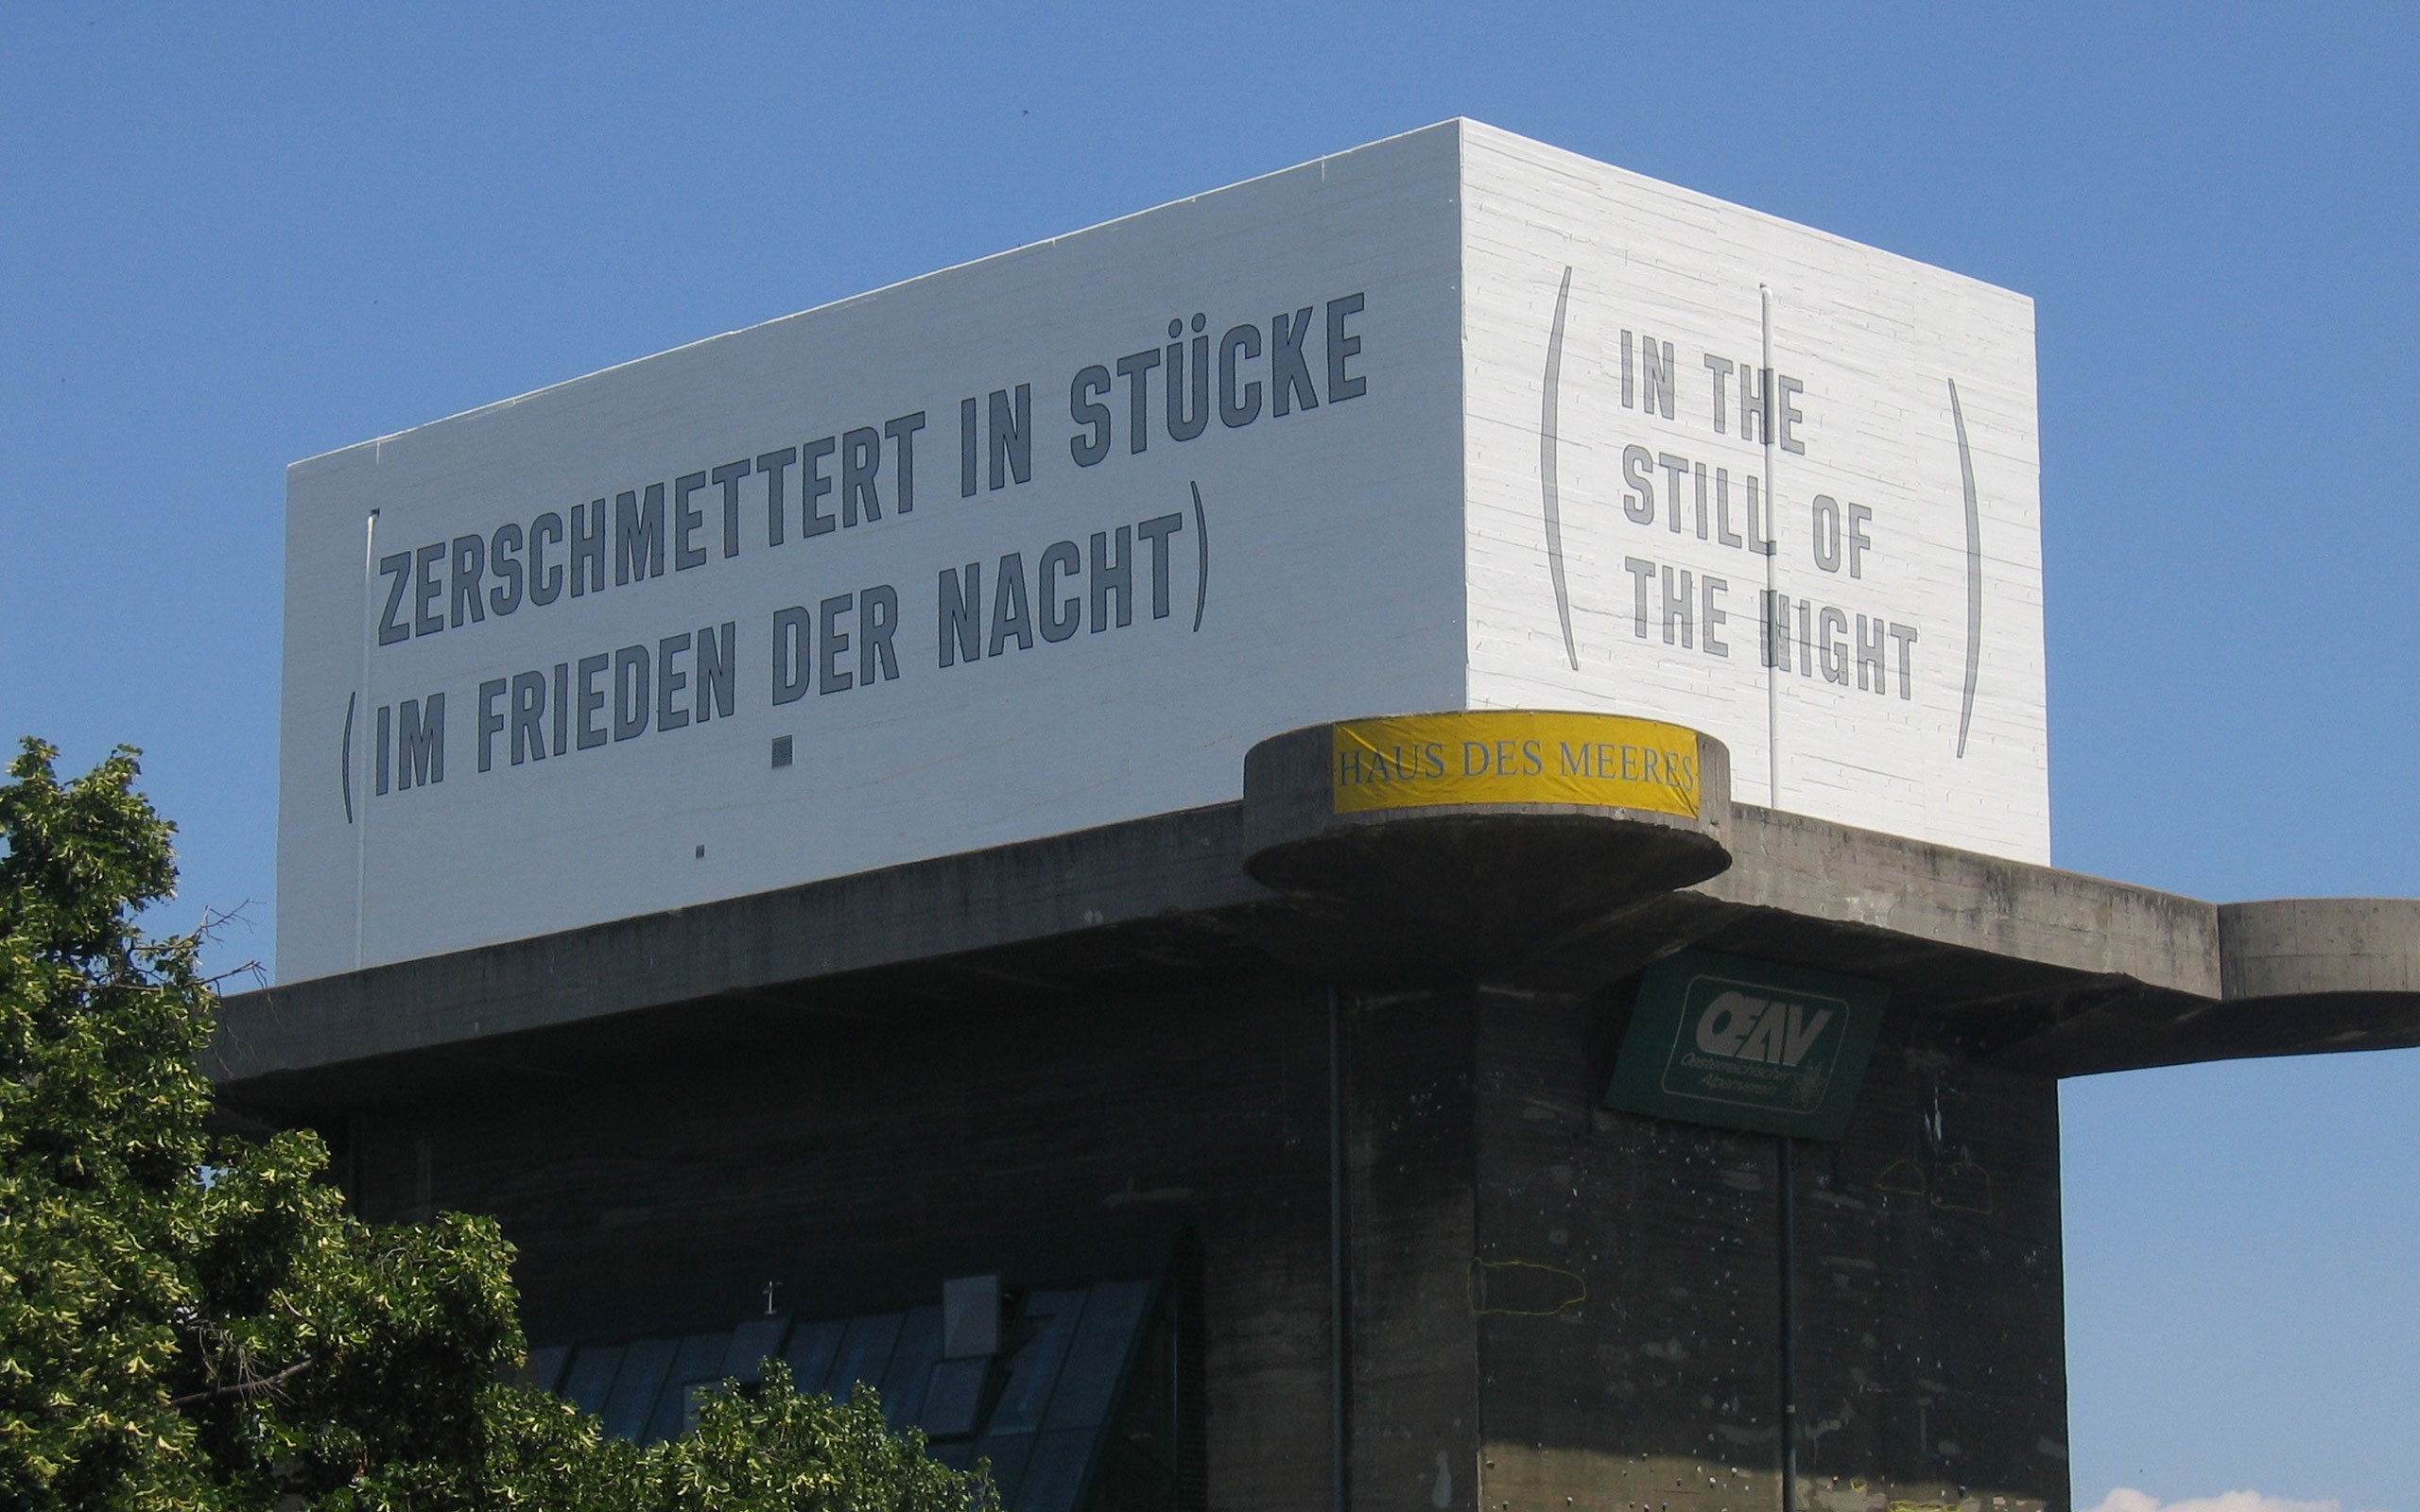 11 Lawrence Weiner